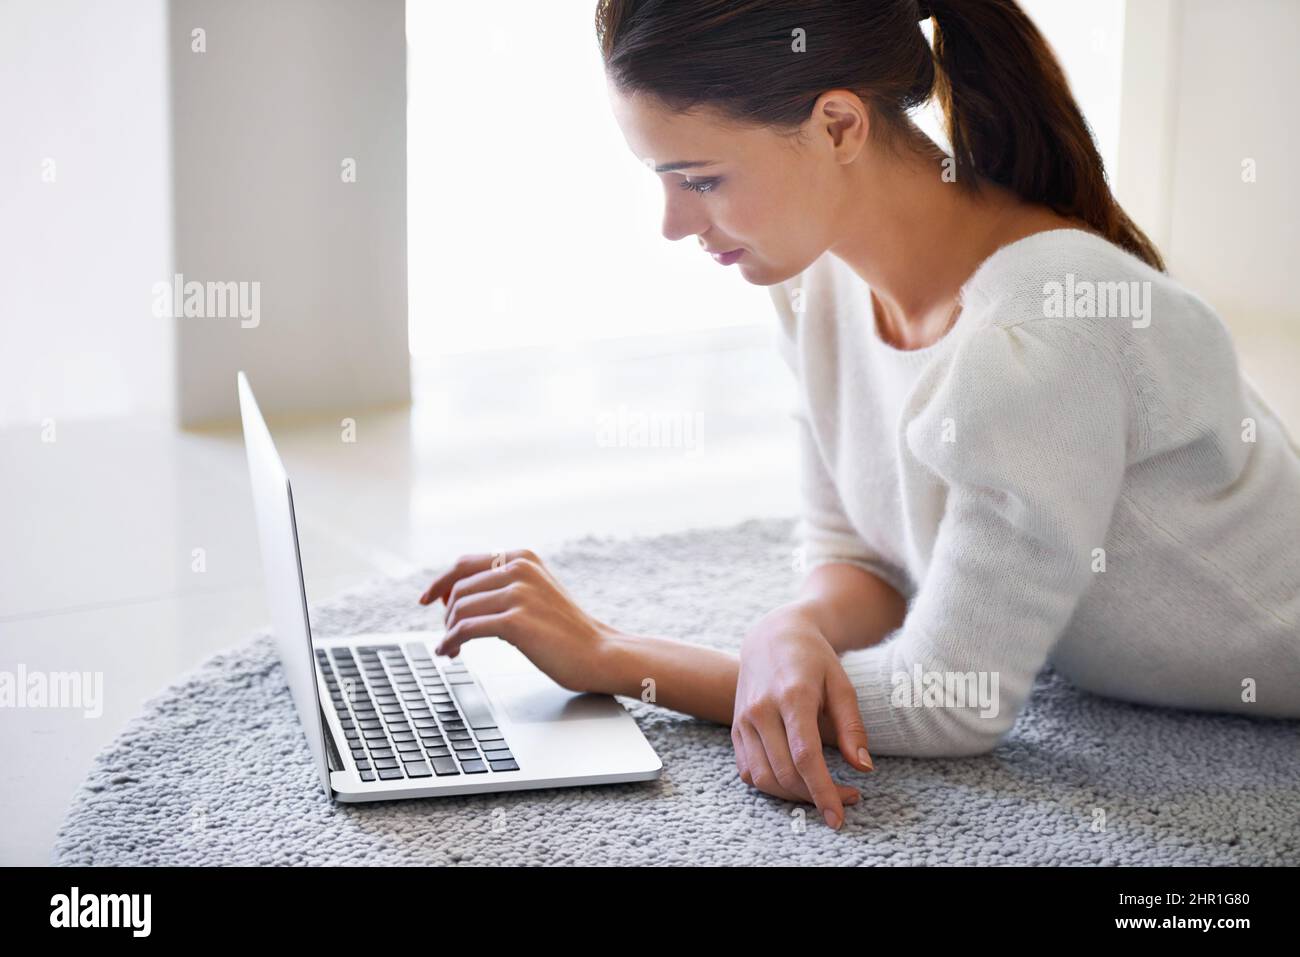 My morning dose of social networking. A beautiful young woman lying on her floor at home and using a laptop. Stock Photo